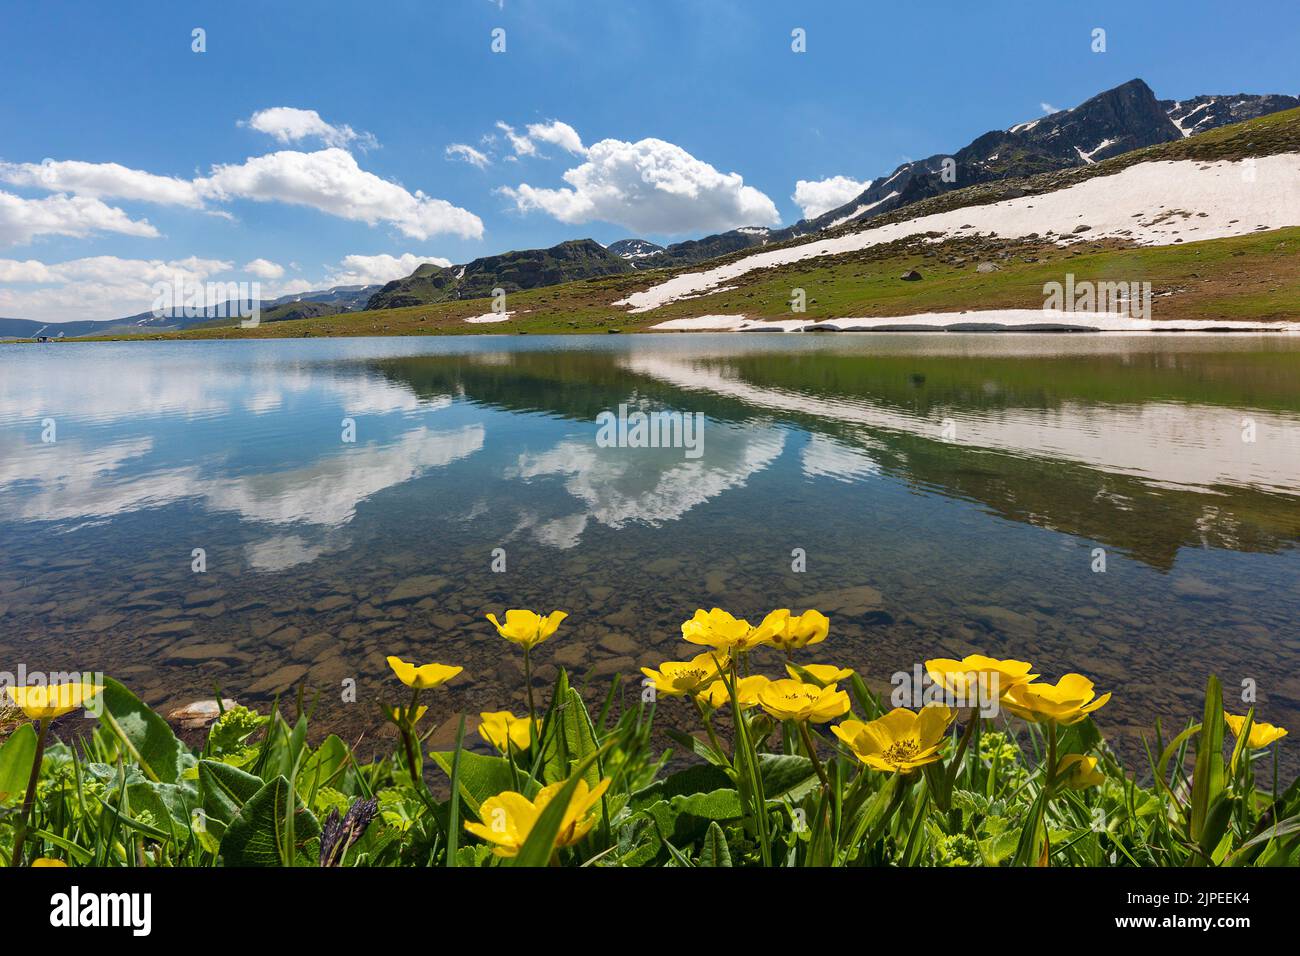 Mountain lake and wildflowers in the highlands of the town of Uzungol in the Black Sea region of Turkey Stock Photo